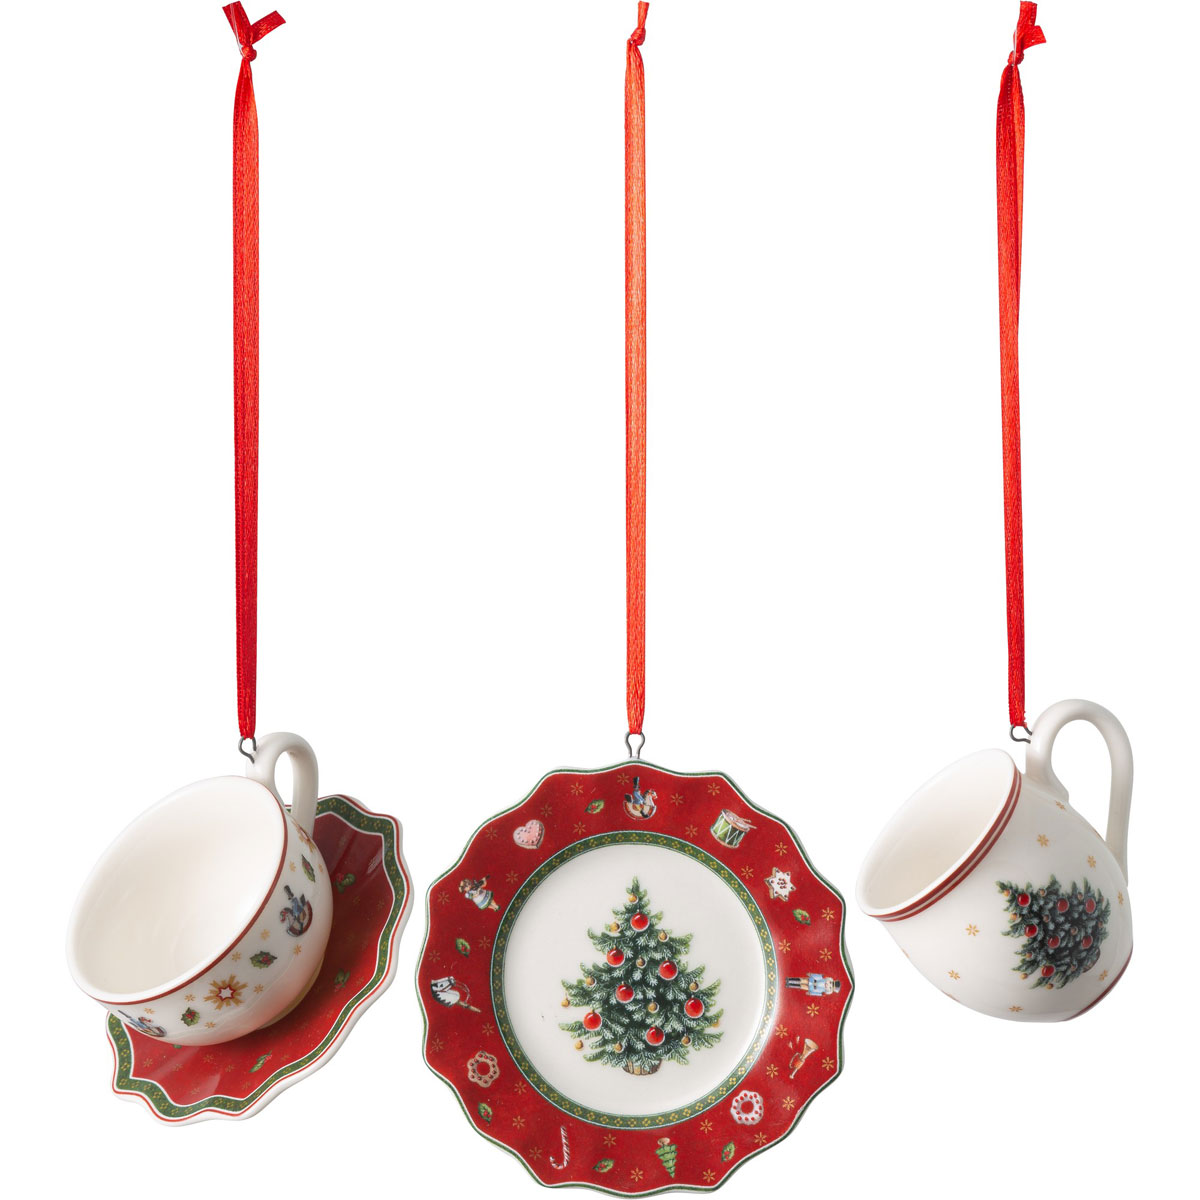 Villeroy and Boch Toys Delight Decoration Ornaments, Tableware, Red Set of 3